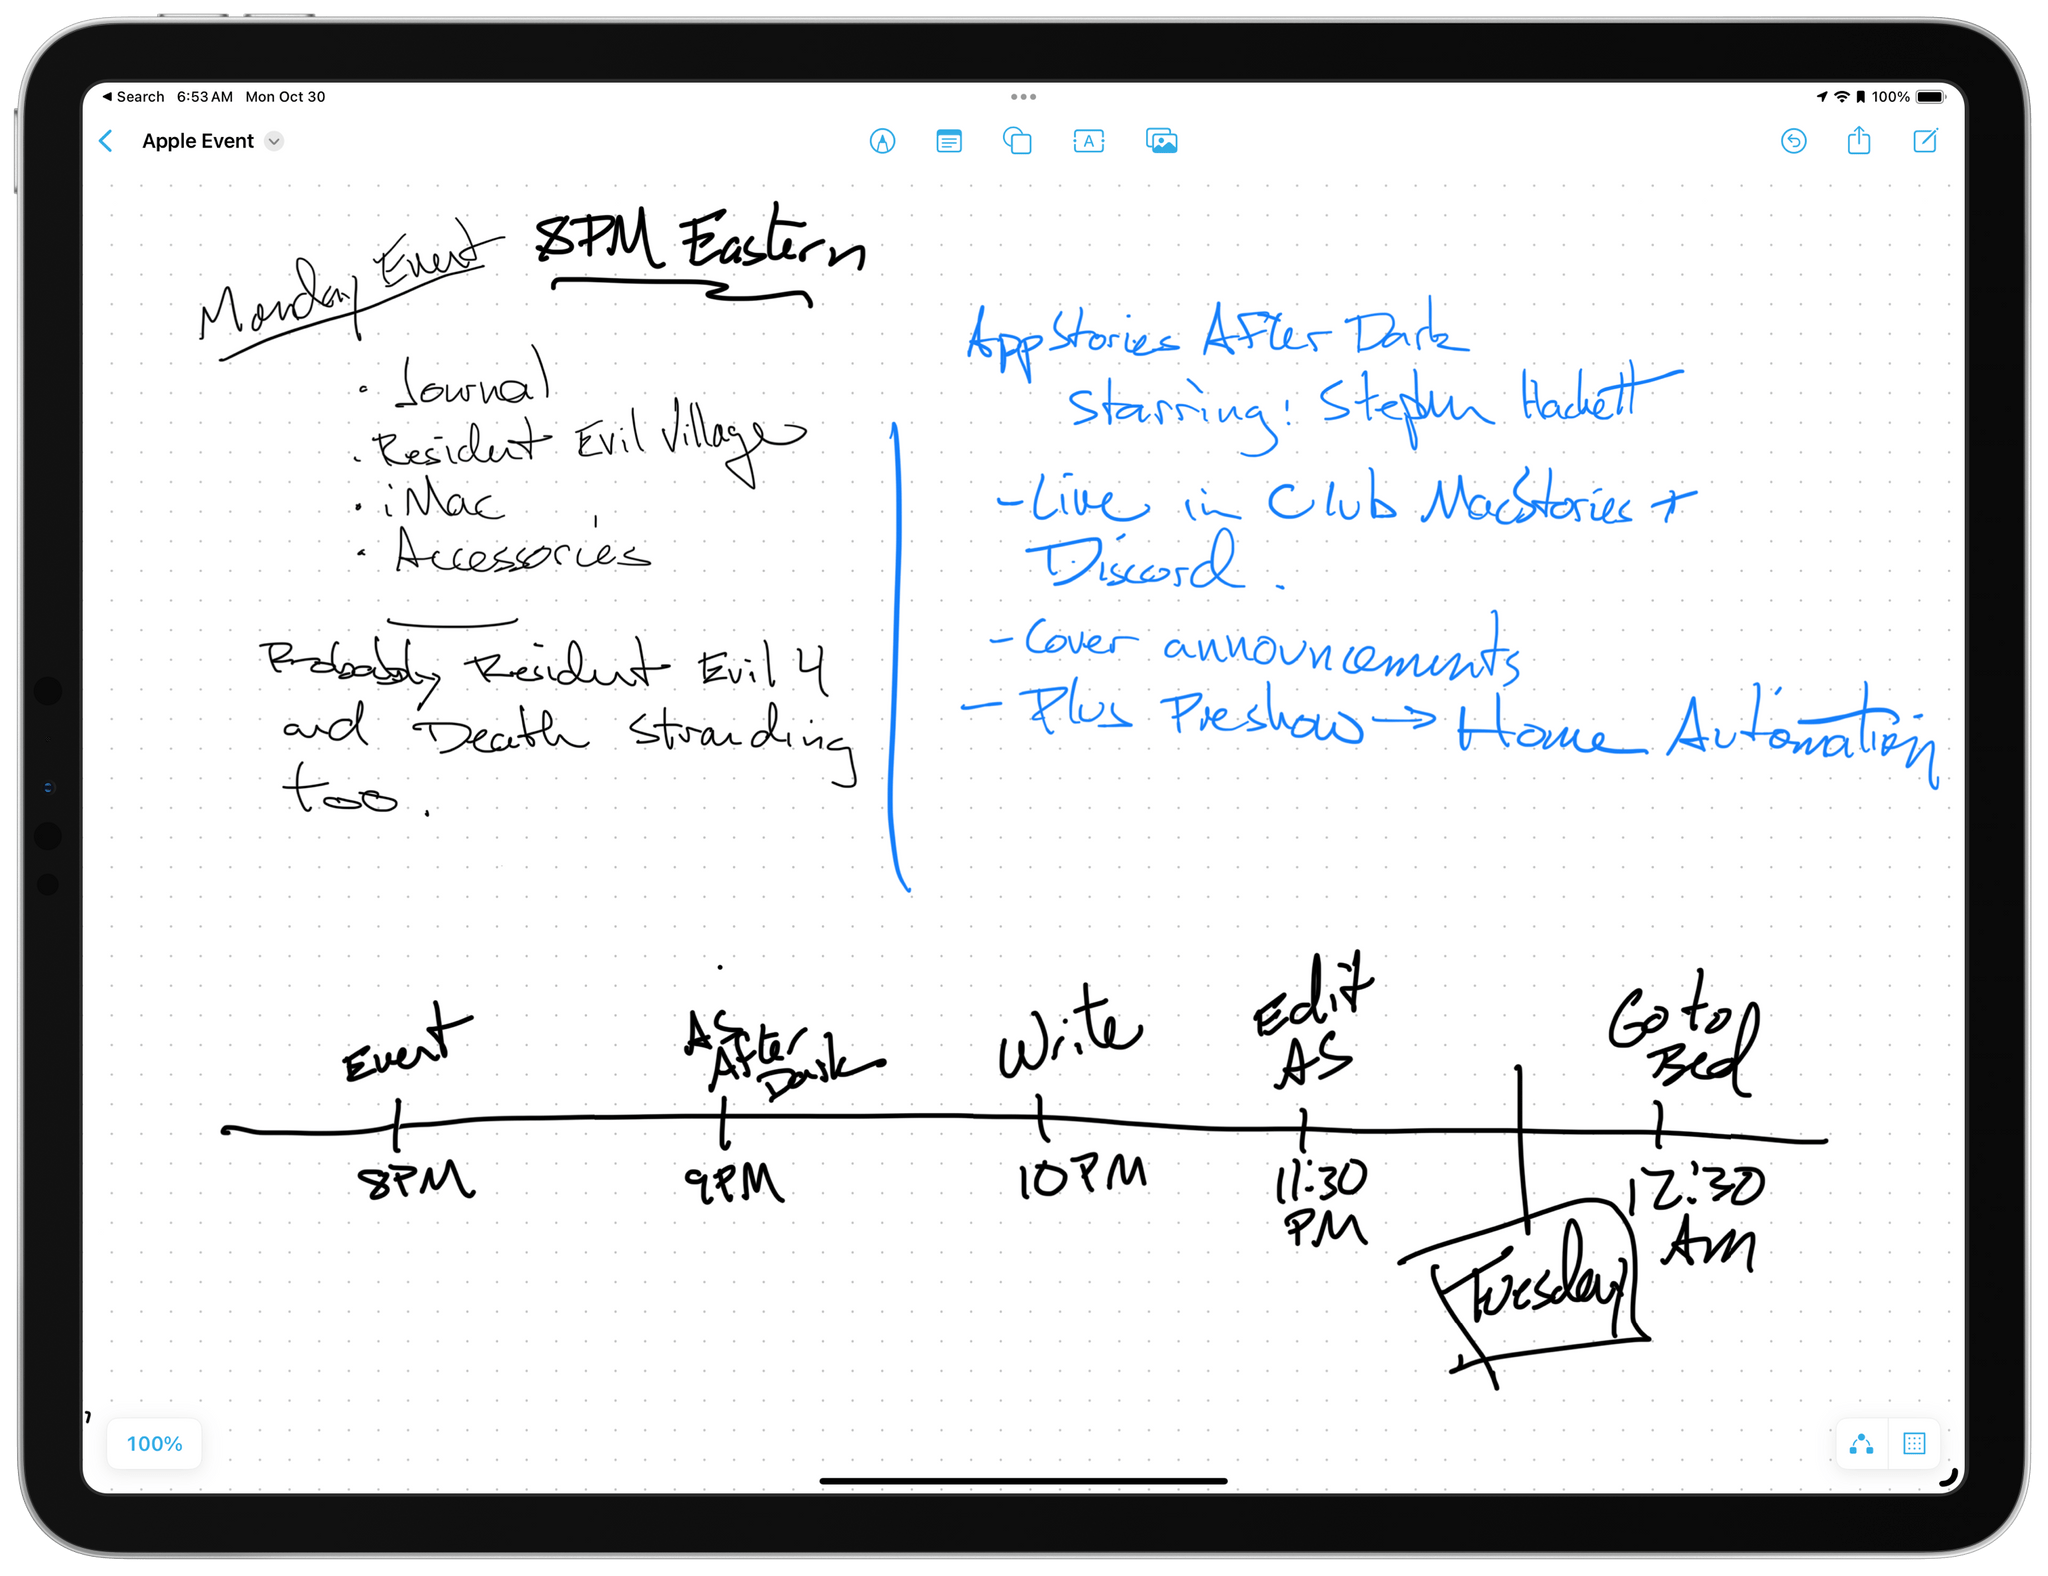 I don't draw, but Rock Paper Pencil is great for planning projects in Freeform or an app like [MindNode](https://www.mindnode.com).